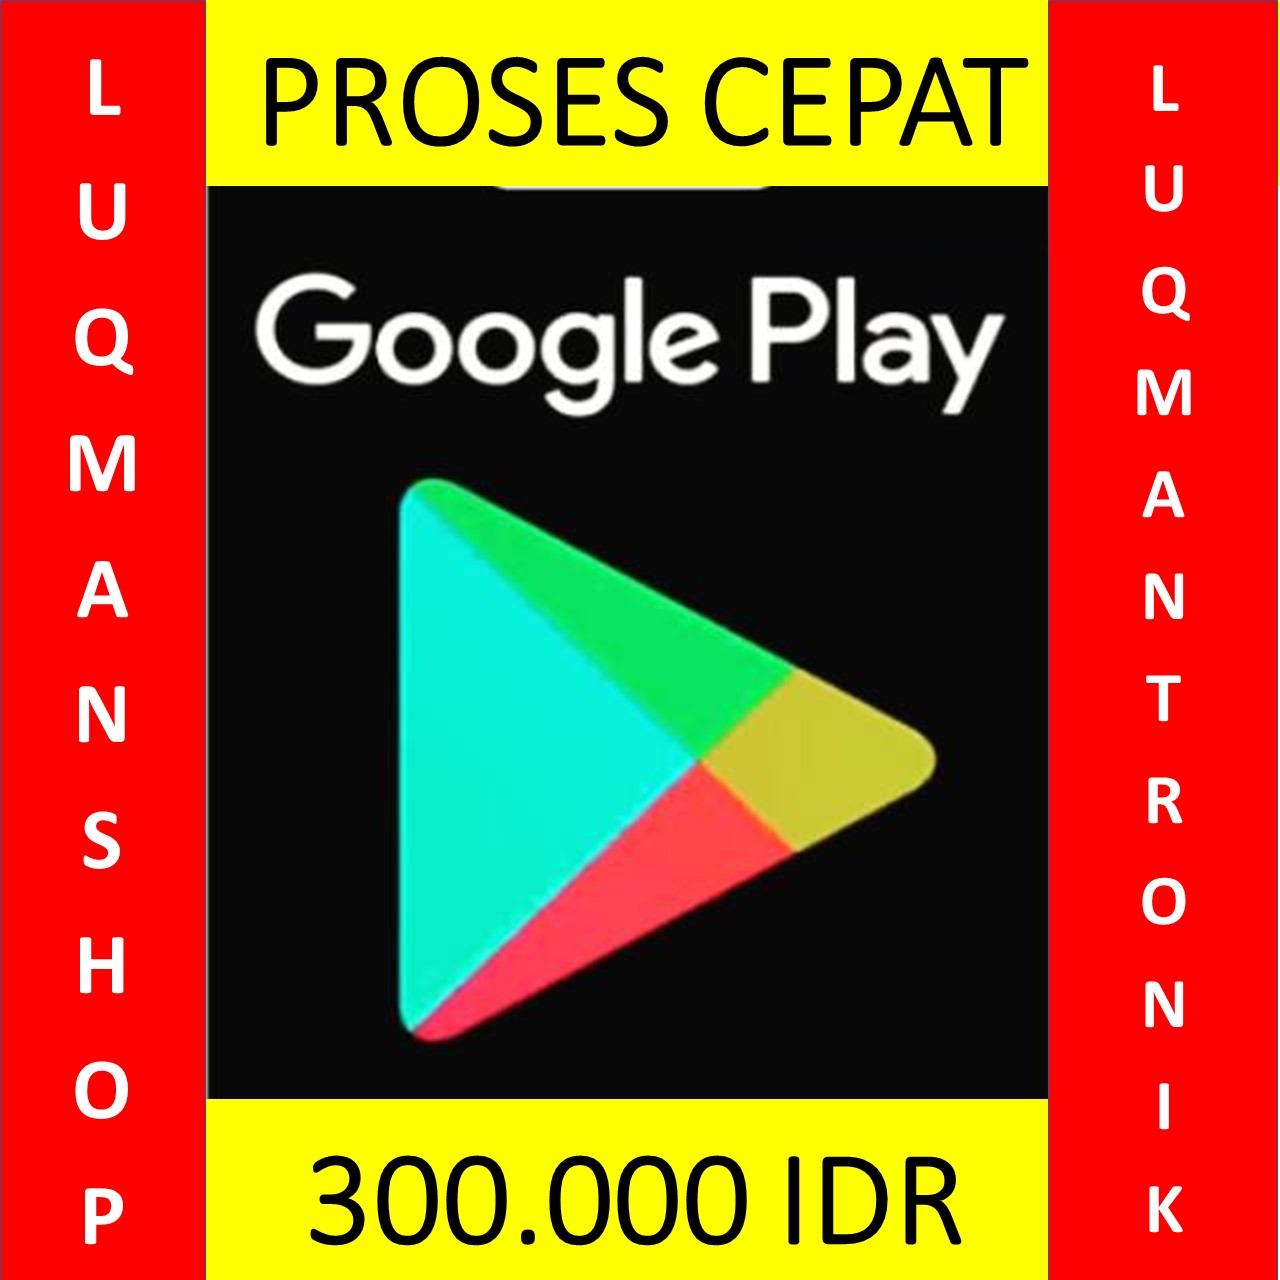 Voucher Game GOOGLE PLAY INDONESIA - Google Play Gift Card Indonesia Rp. 300.000